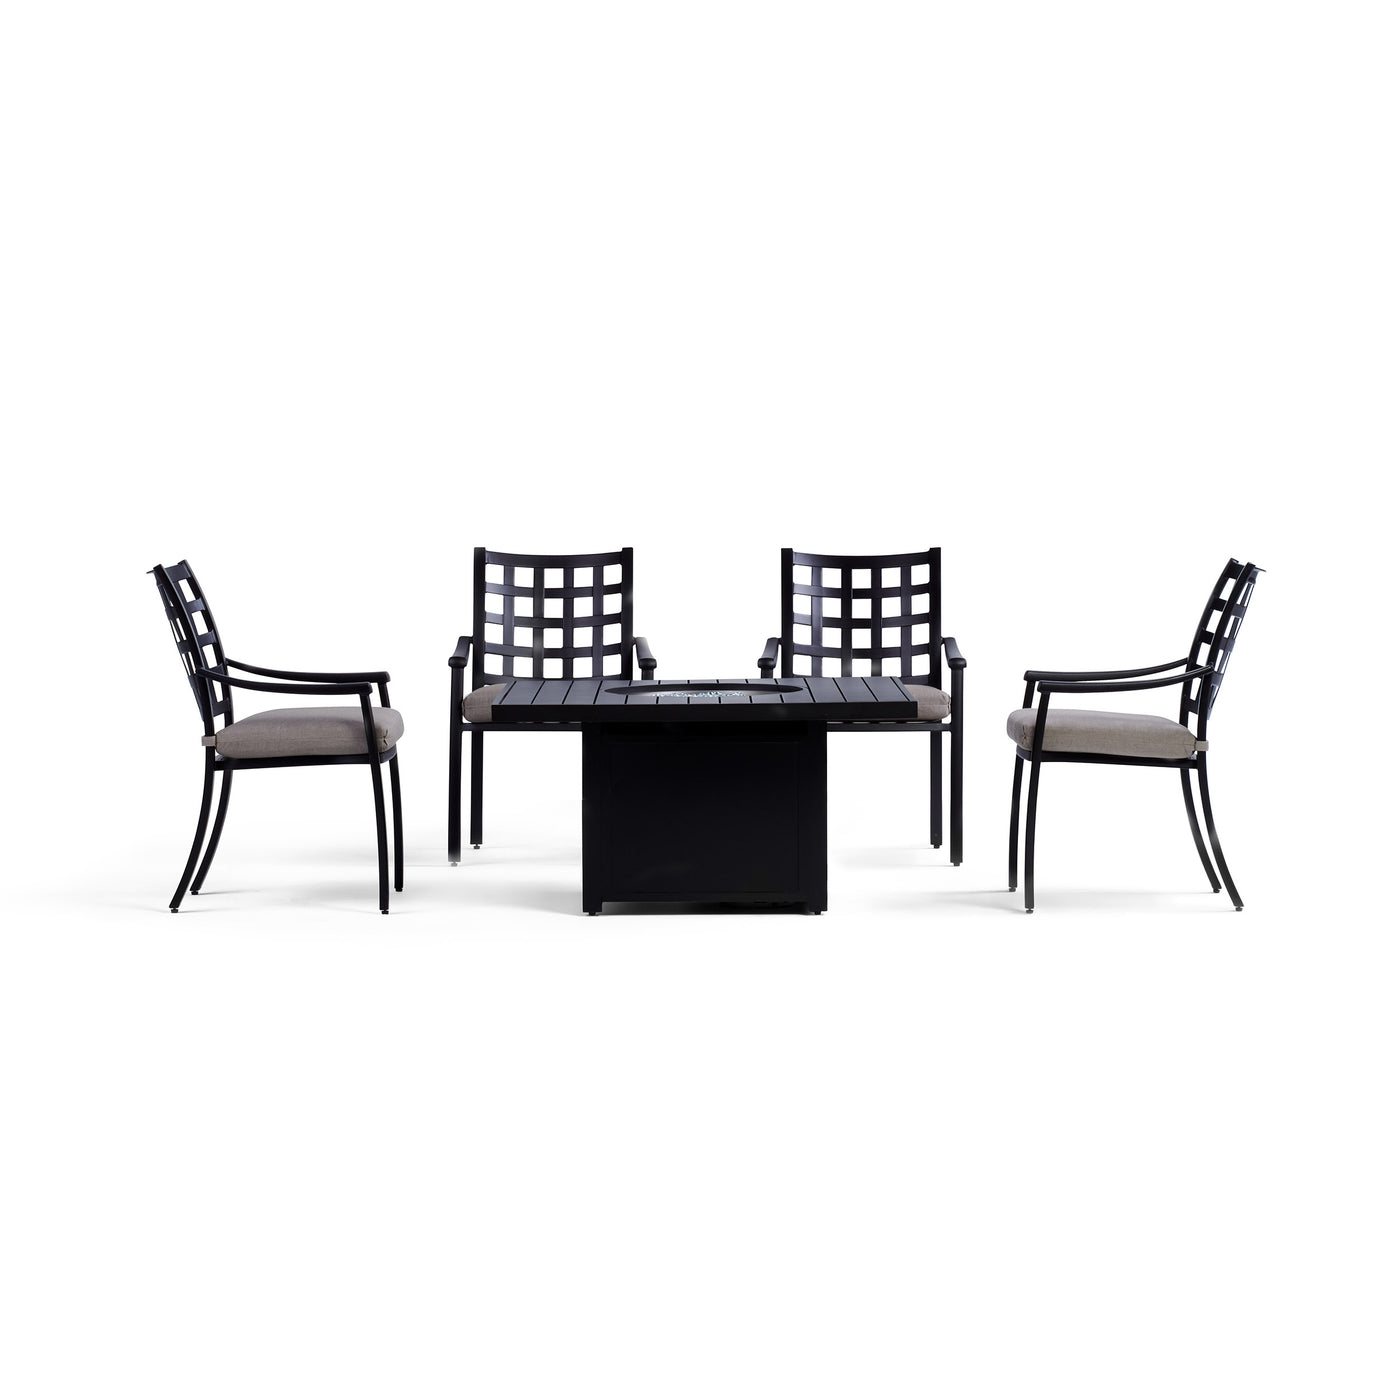 Yardbird Lily Outdoor Fire Pit Table Set with 4 Fixed Chairs Outdoor Furniture